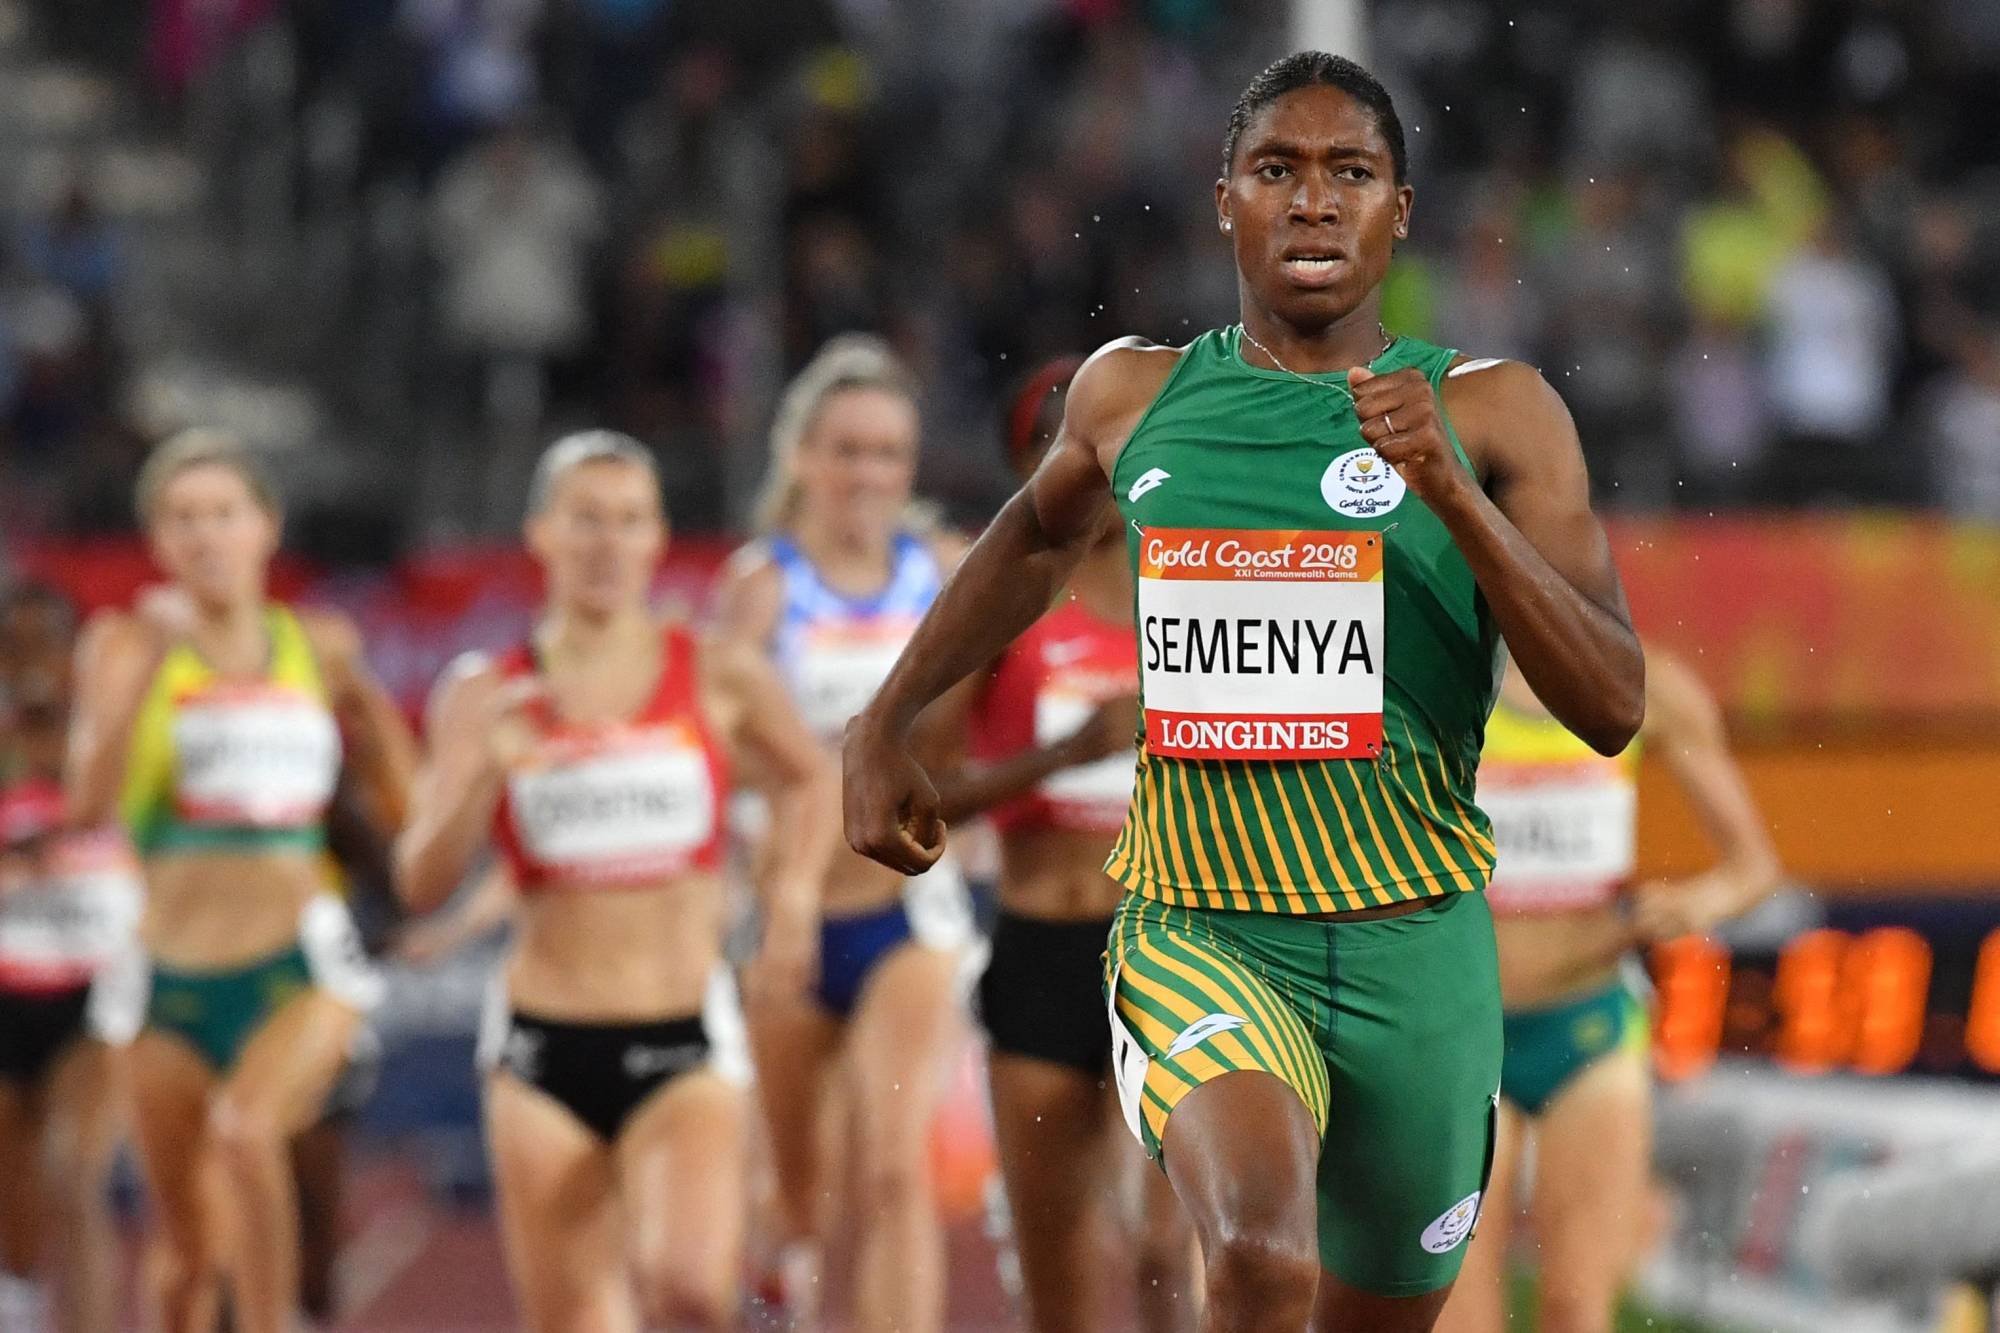 South African athlete Caster Semenya hails court ruling as 'only